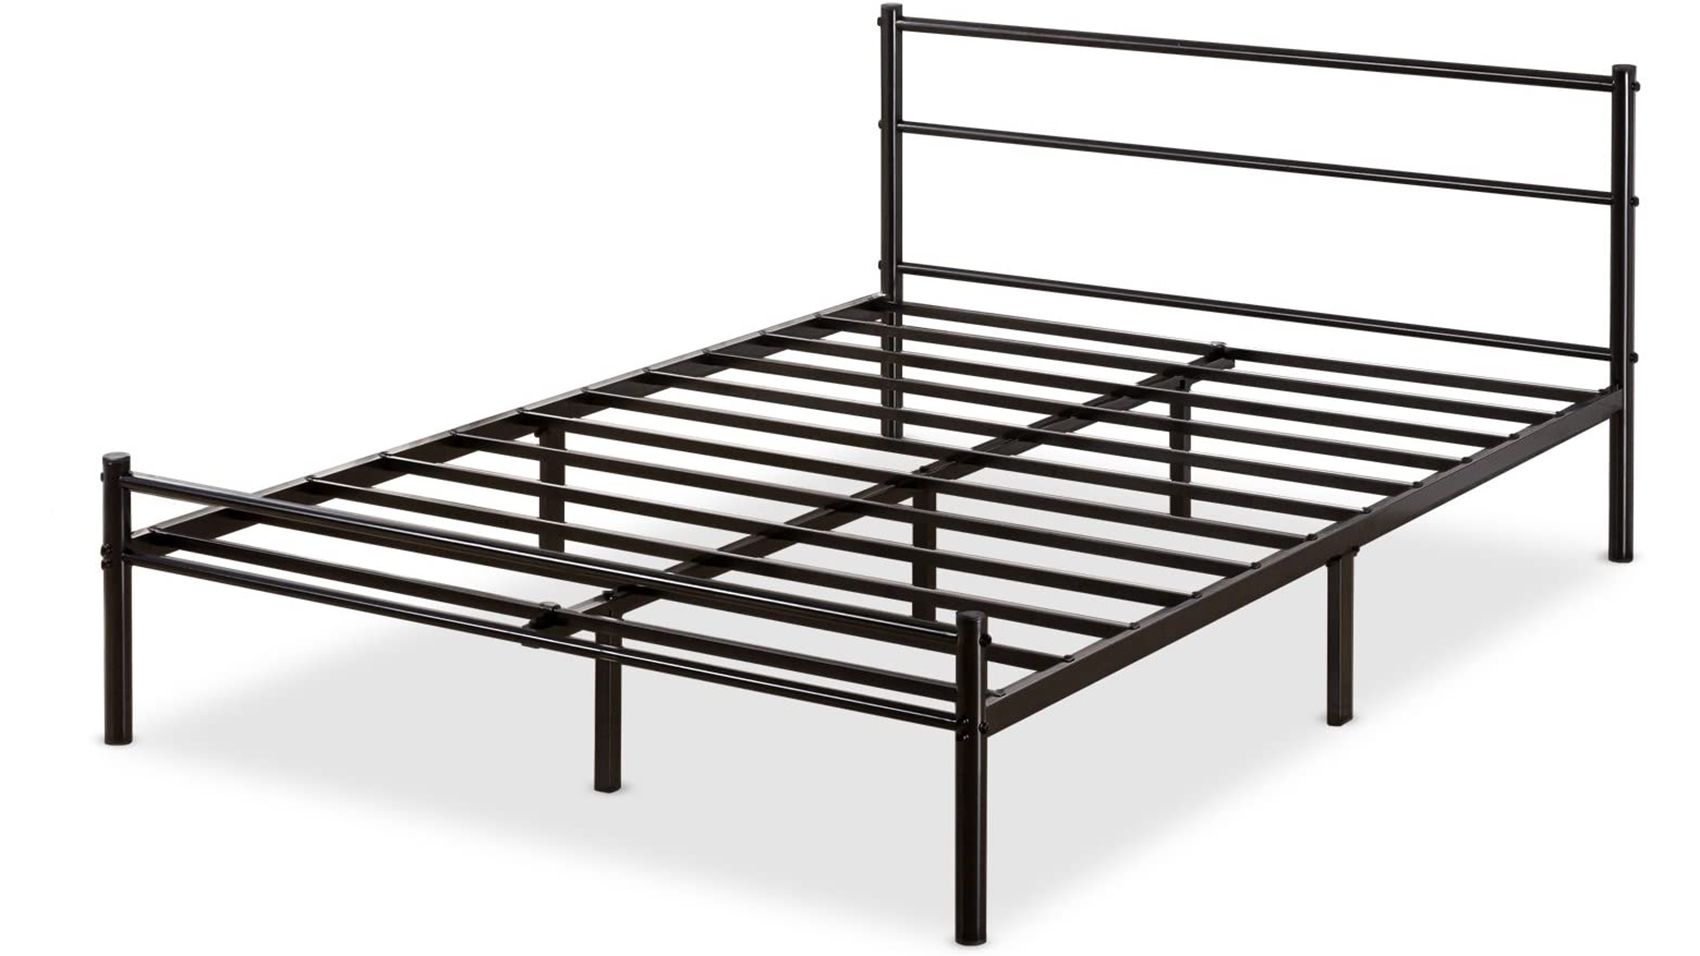 Zinus Bed Frame Review This 100, Zinus Metal Bed Frame Review